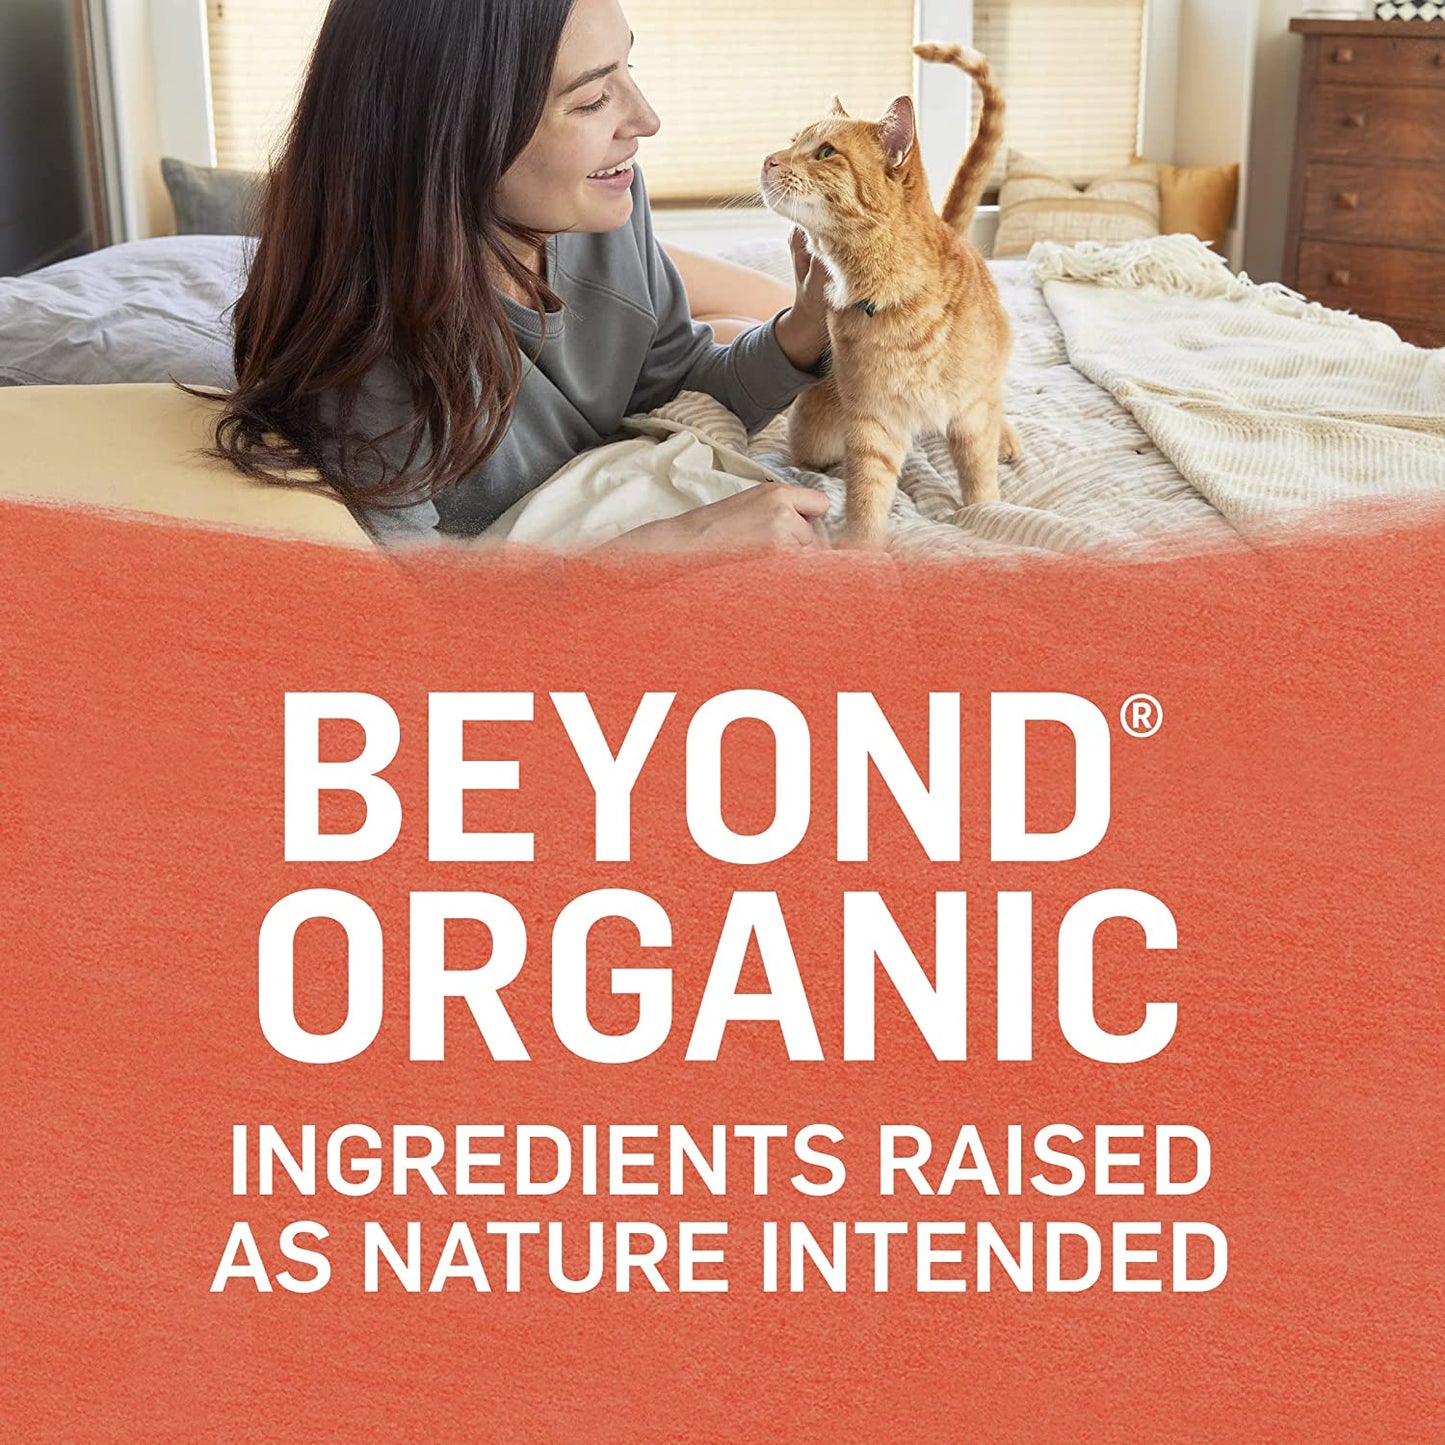 New! Purina beyond Organic High Protein Wet Cat Food